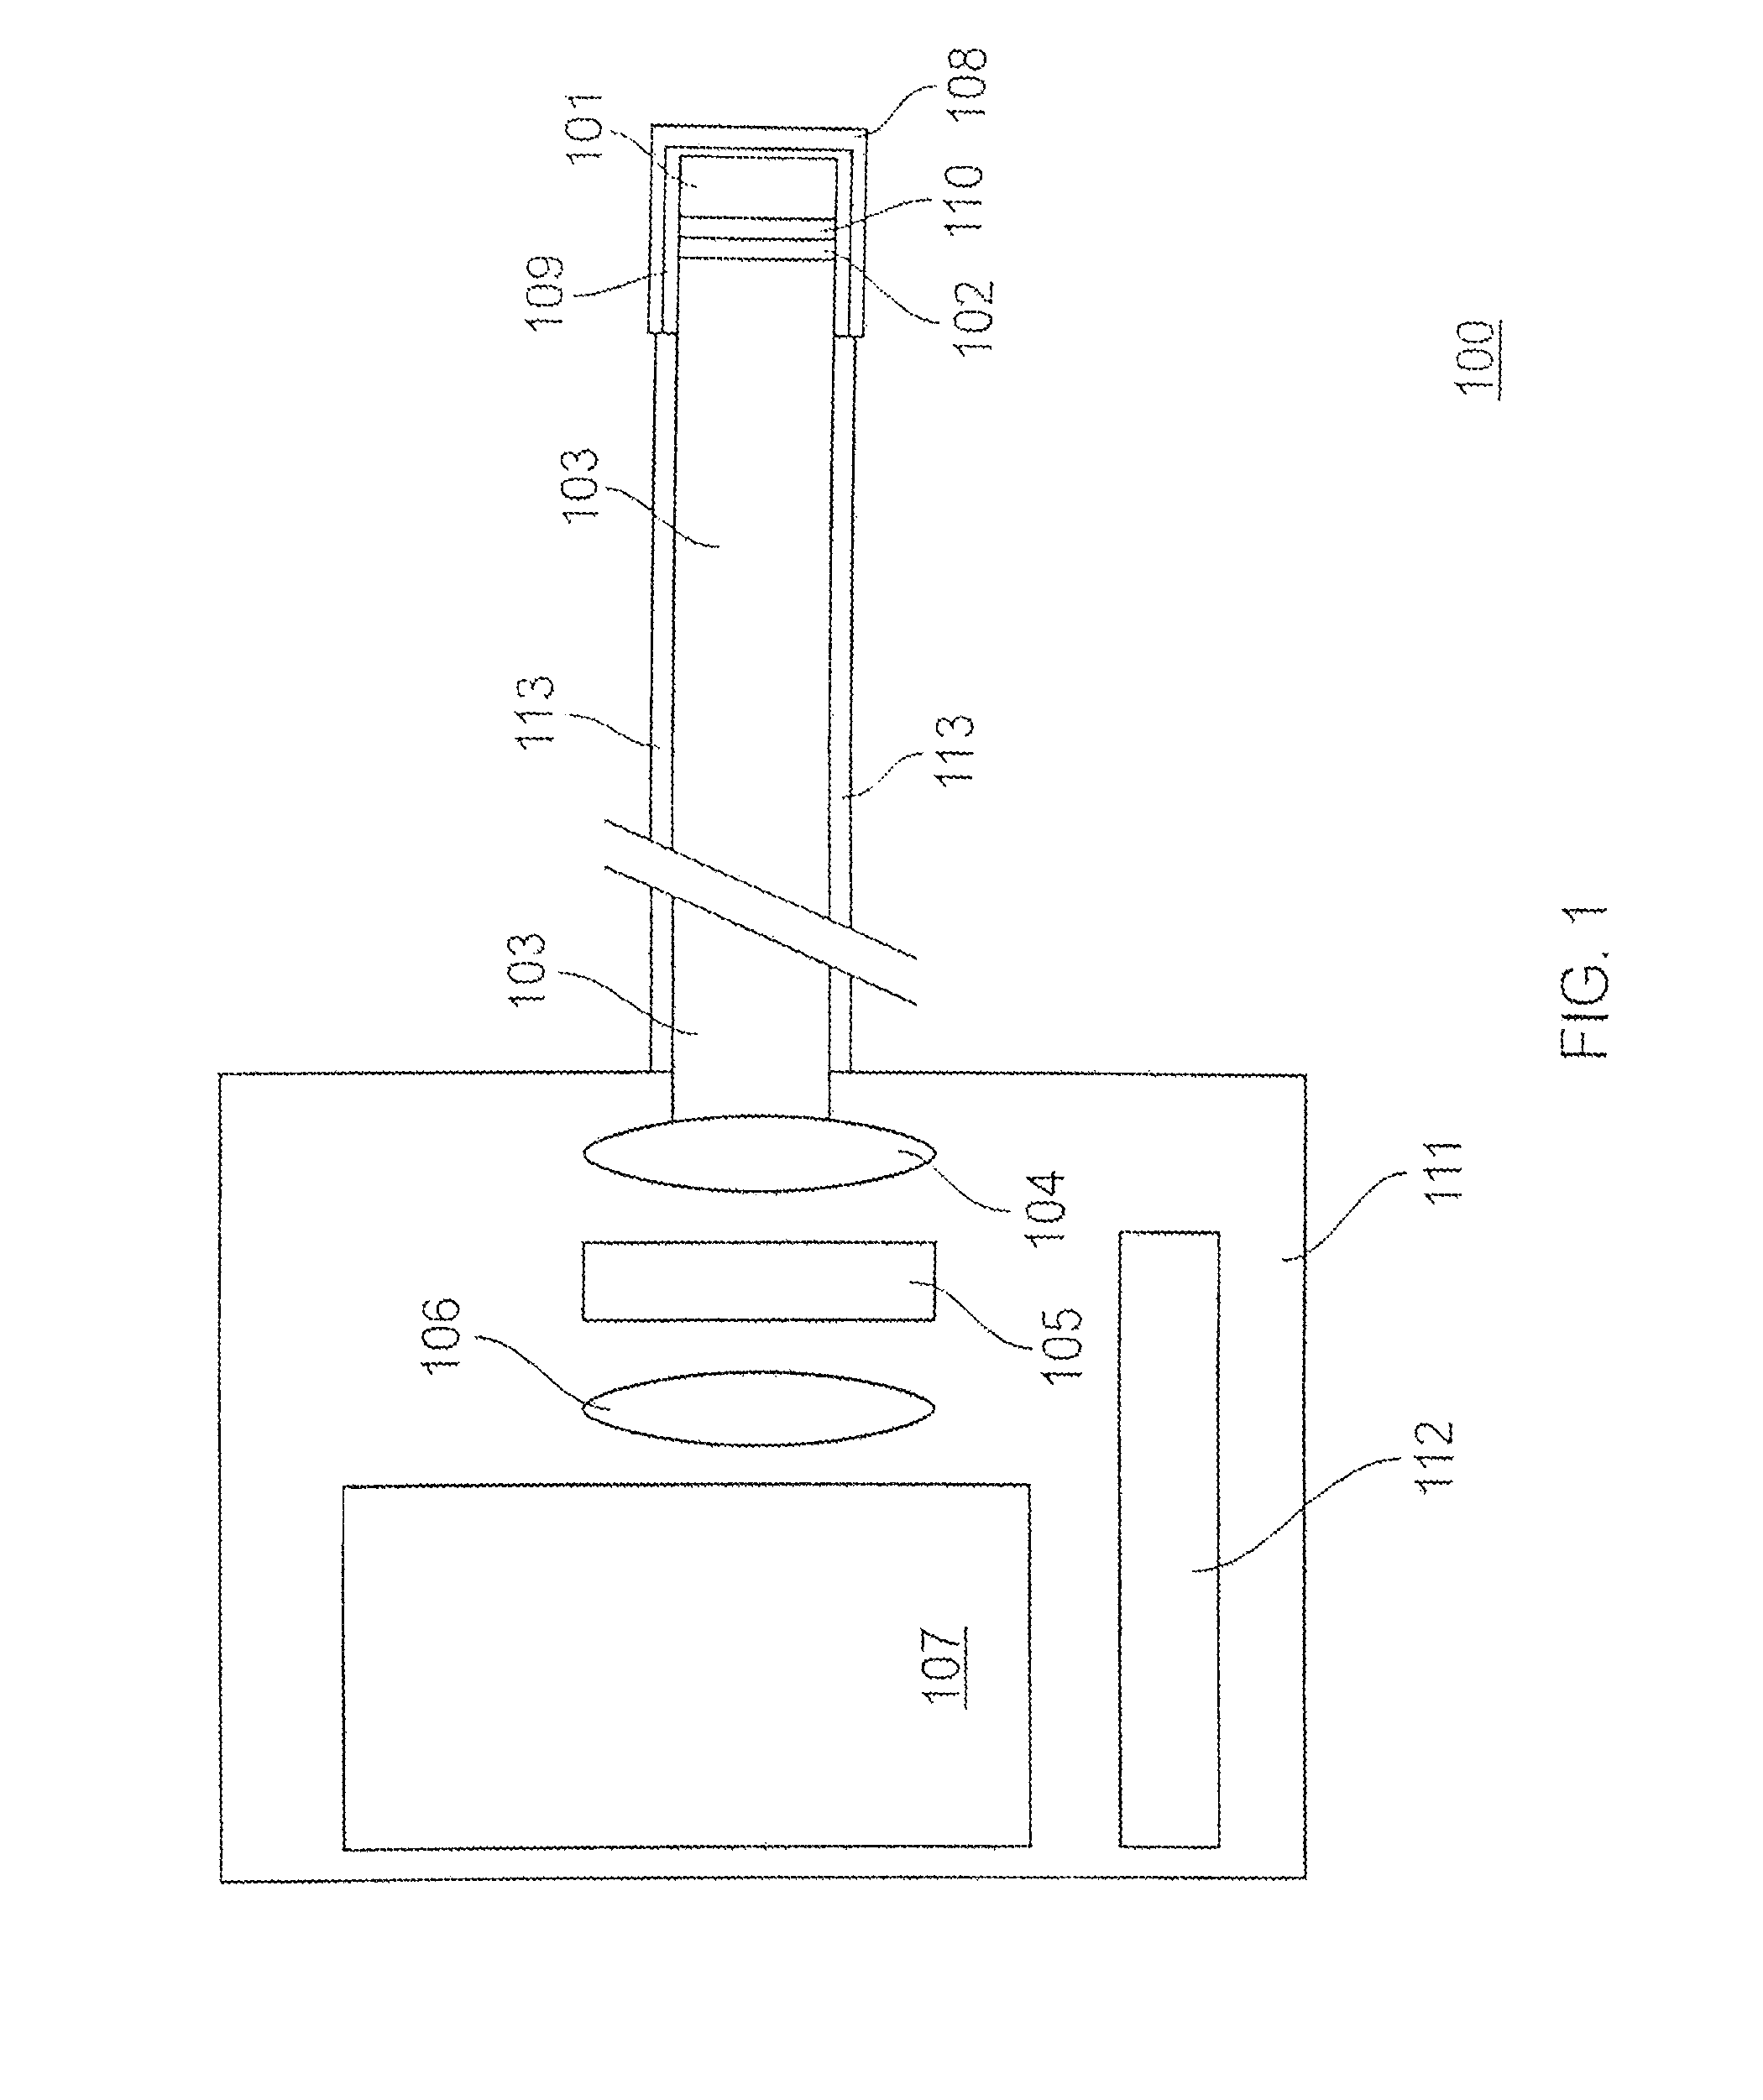 Method and apparatus for imaging of radiation sources